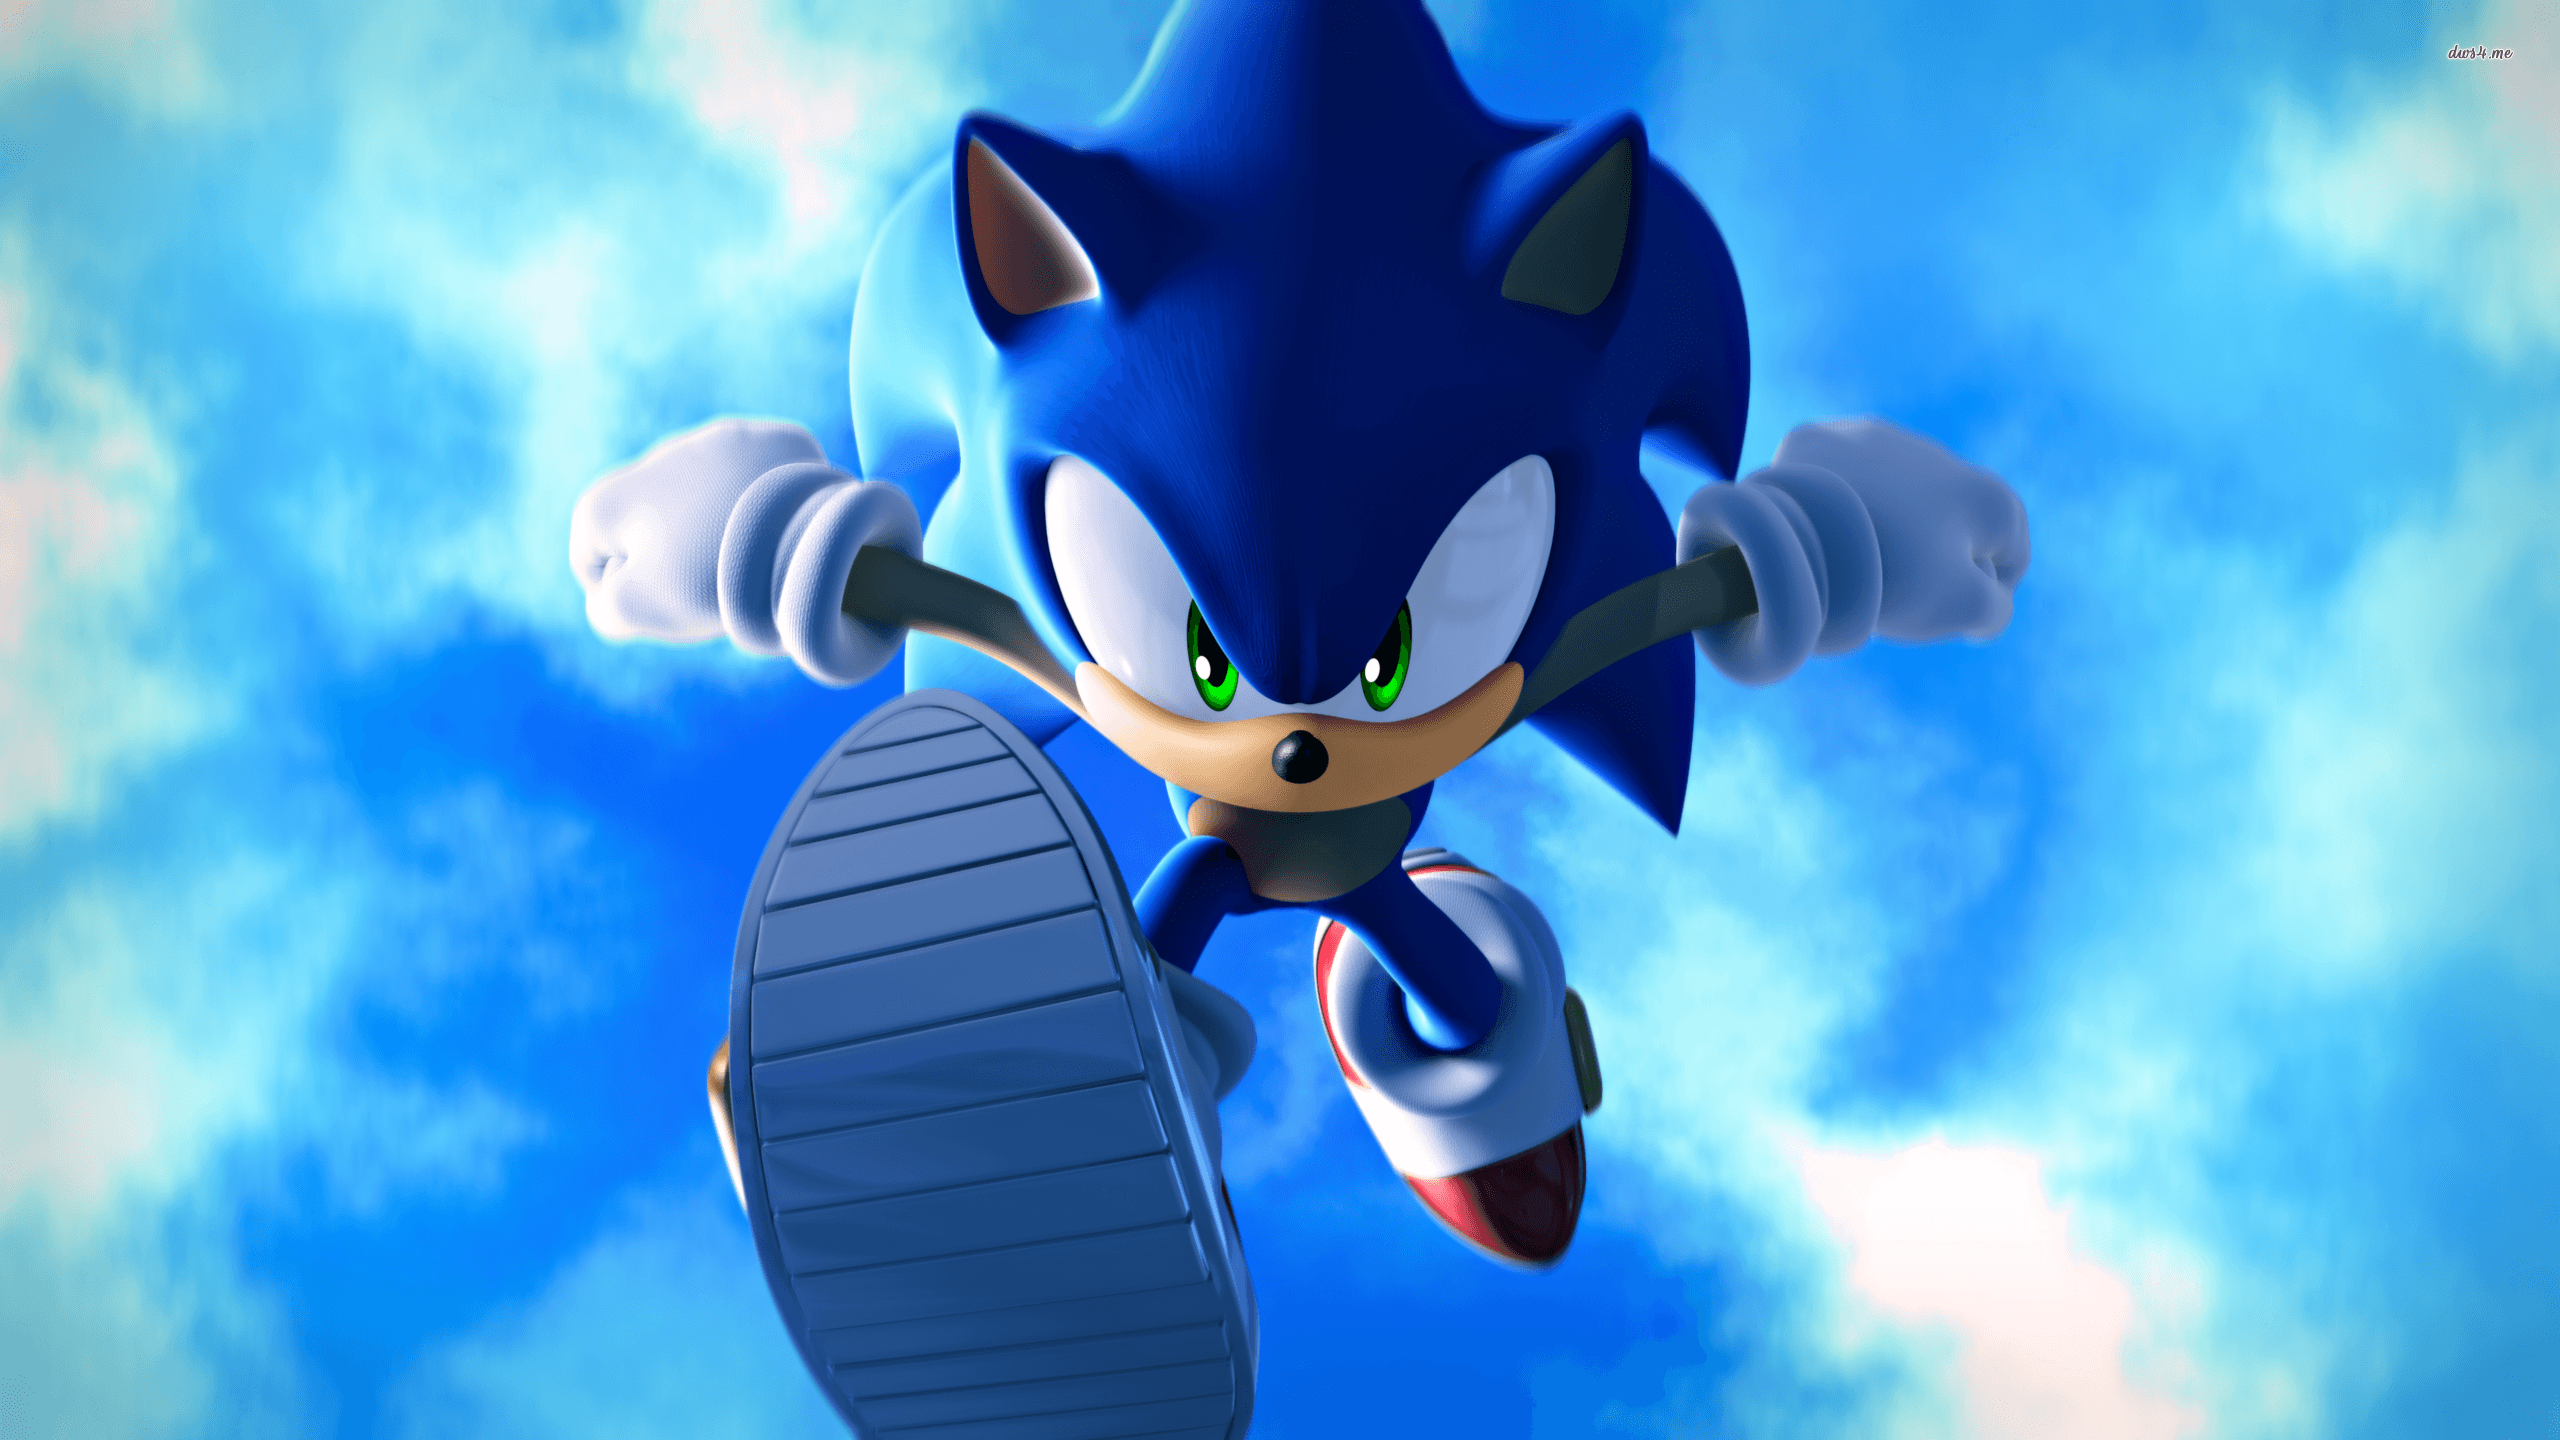 Sonic The Hedgehog 4k Wallpapers Top Free Sonic The Hedgehog 4k Backgrounds Wallpaperaccess